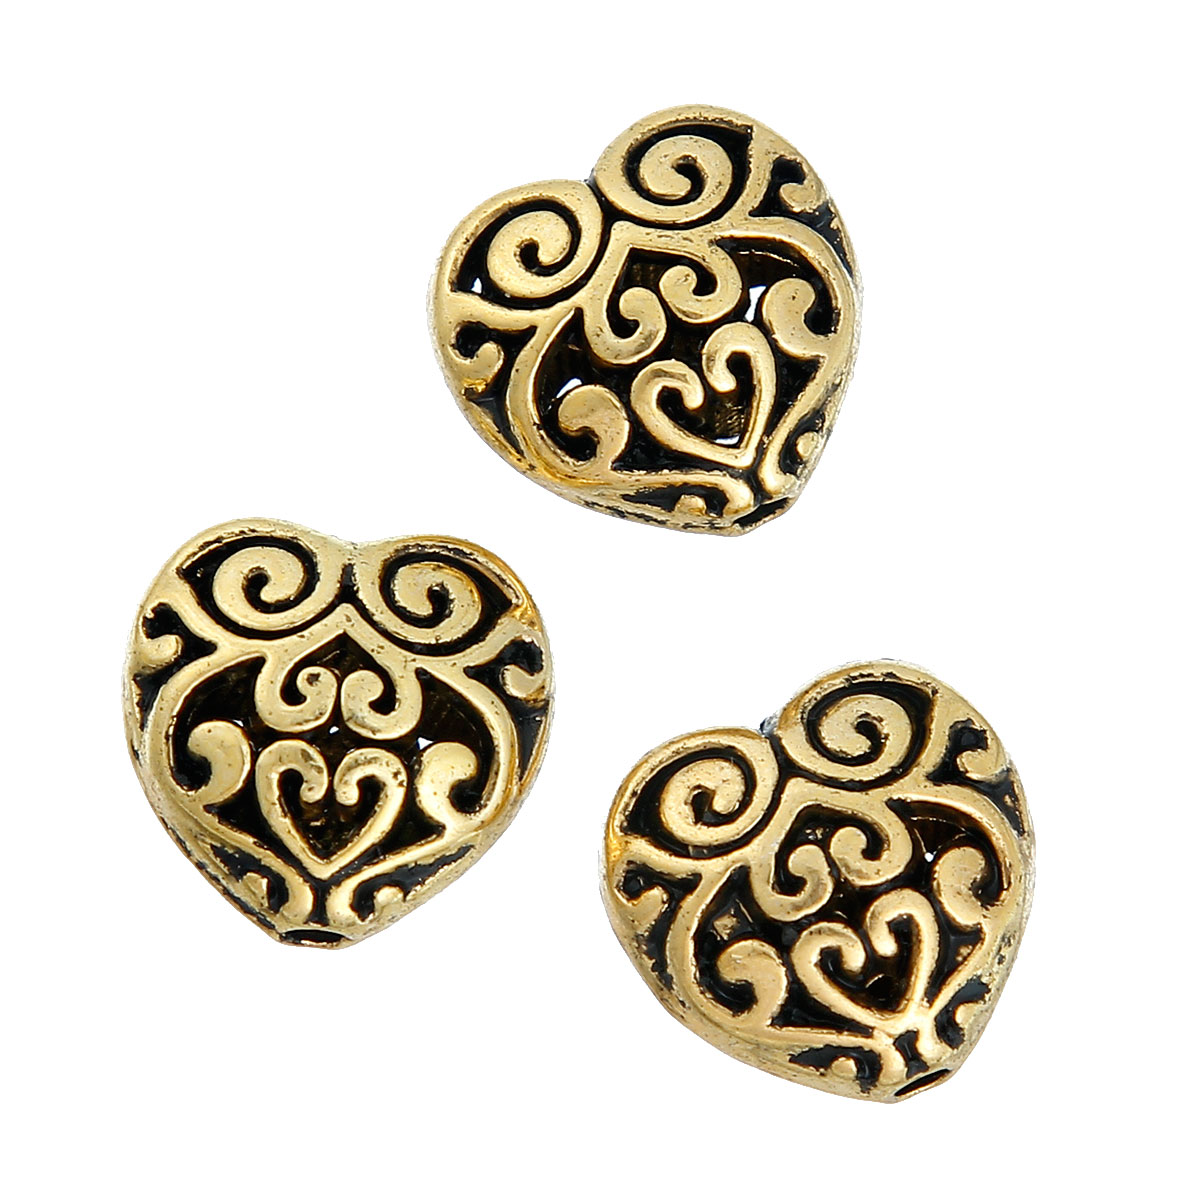 Picture of Zinc Based Alloy Beads Heart Gold Tone Antique Gold Hollow About 13mm x 13mm, 10 PCs